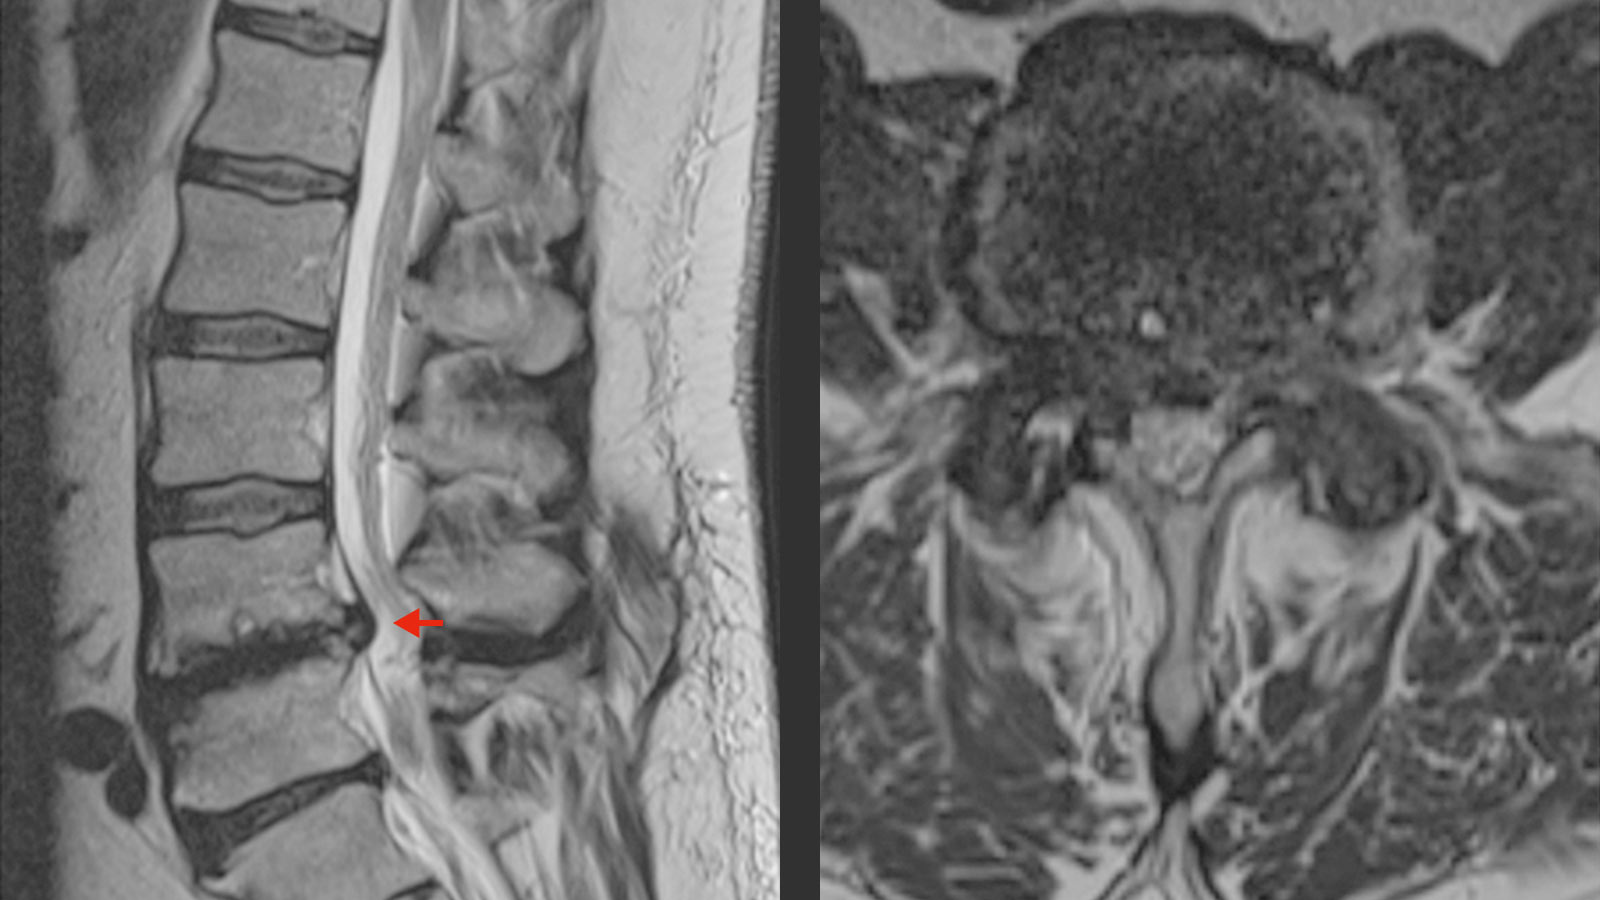 MRI image of the lumbar spine in the supine position with minor spondylolisthesis